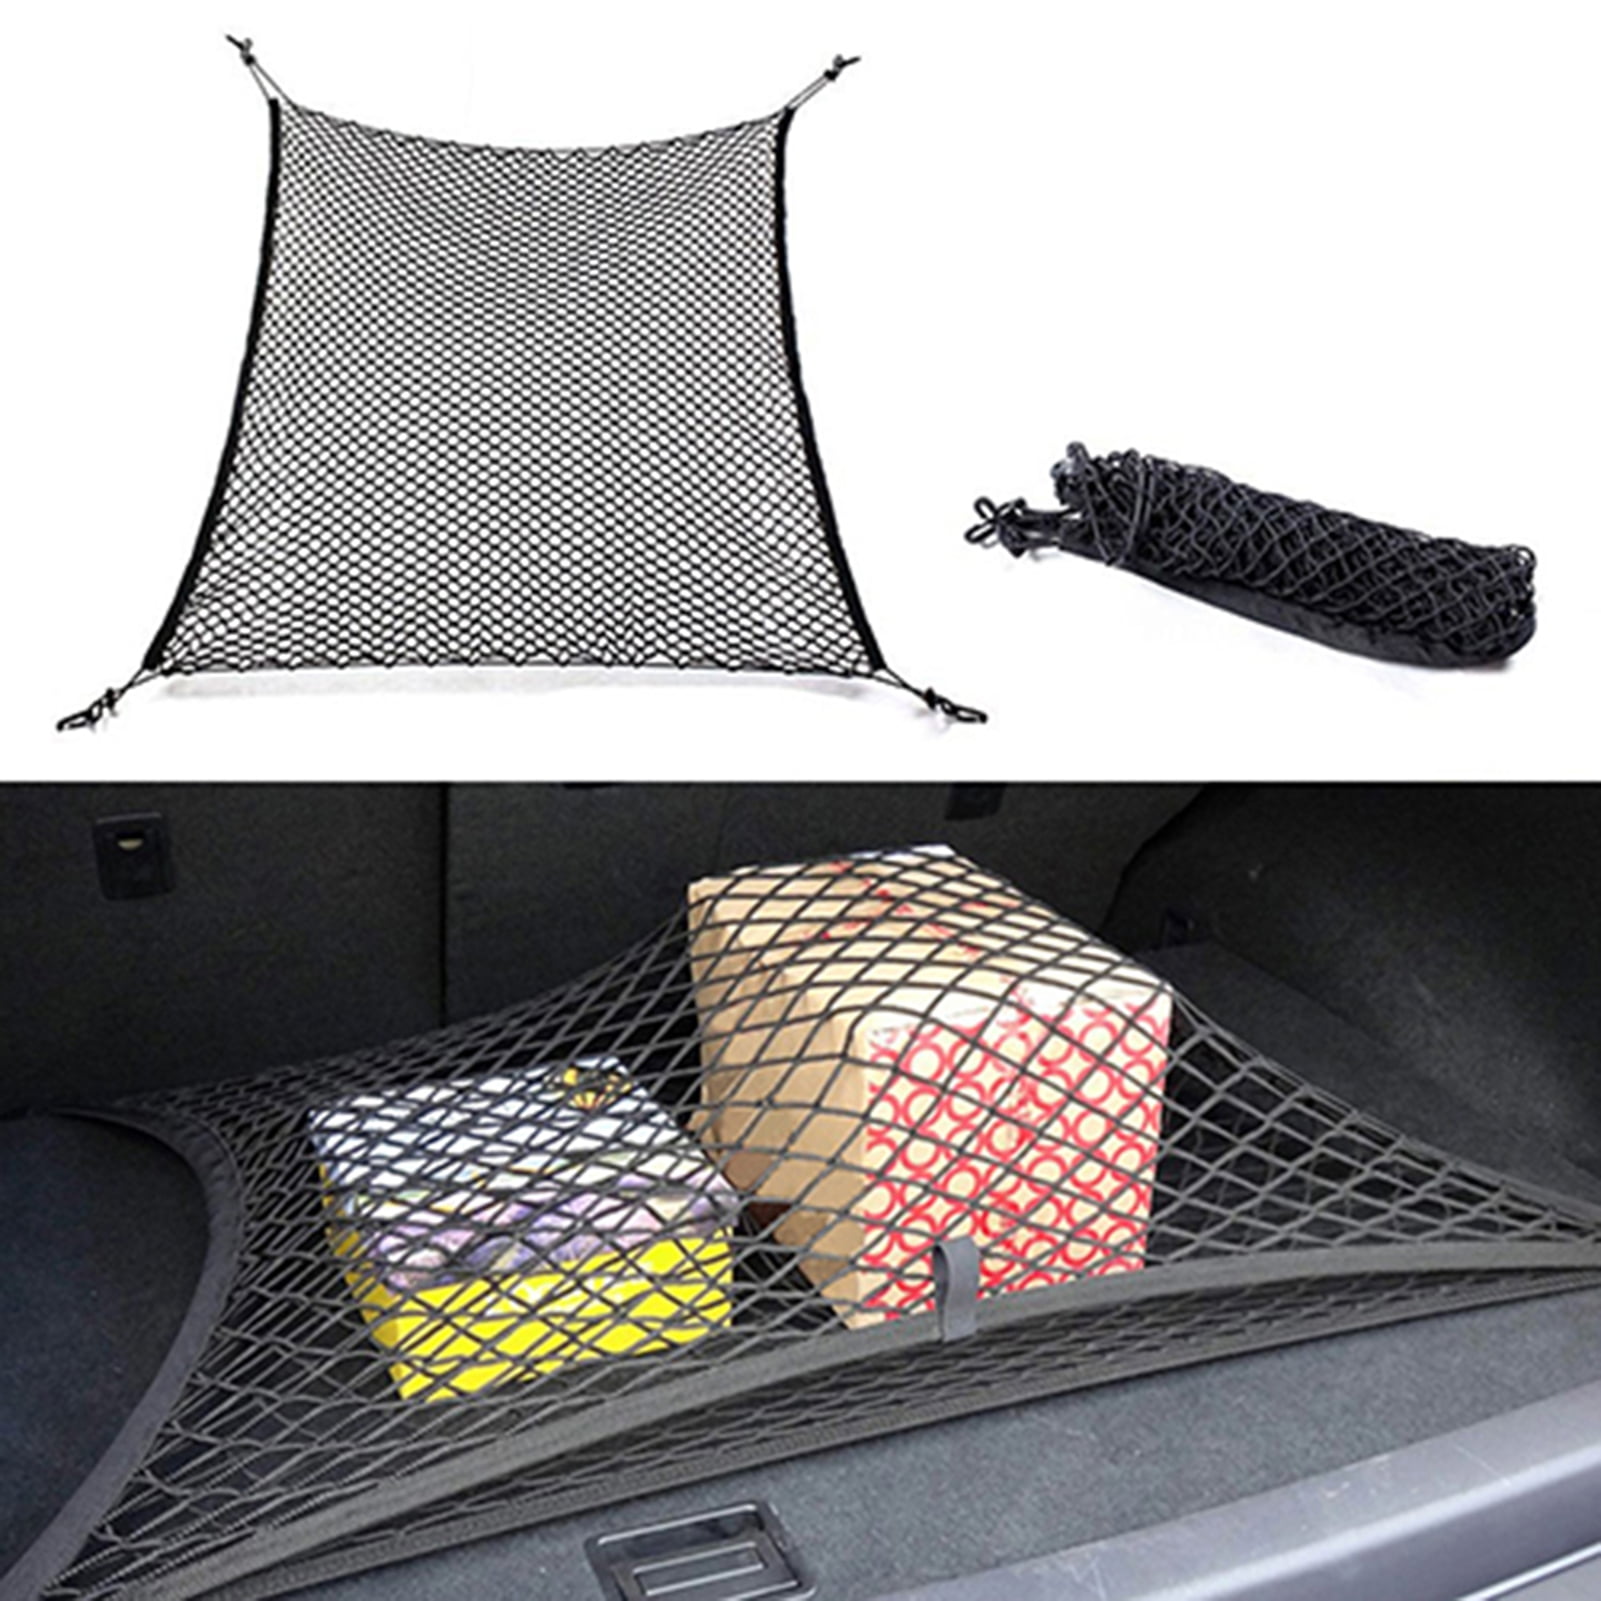 Cargo System + Extra Dividers + Cargo Net - RANCH ROAD